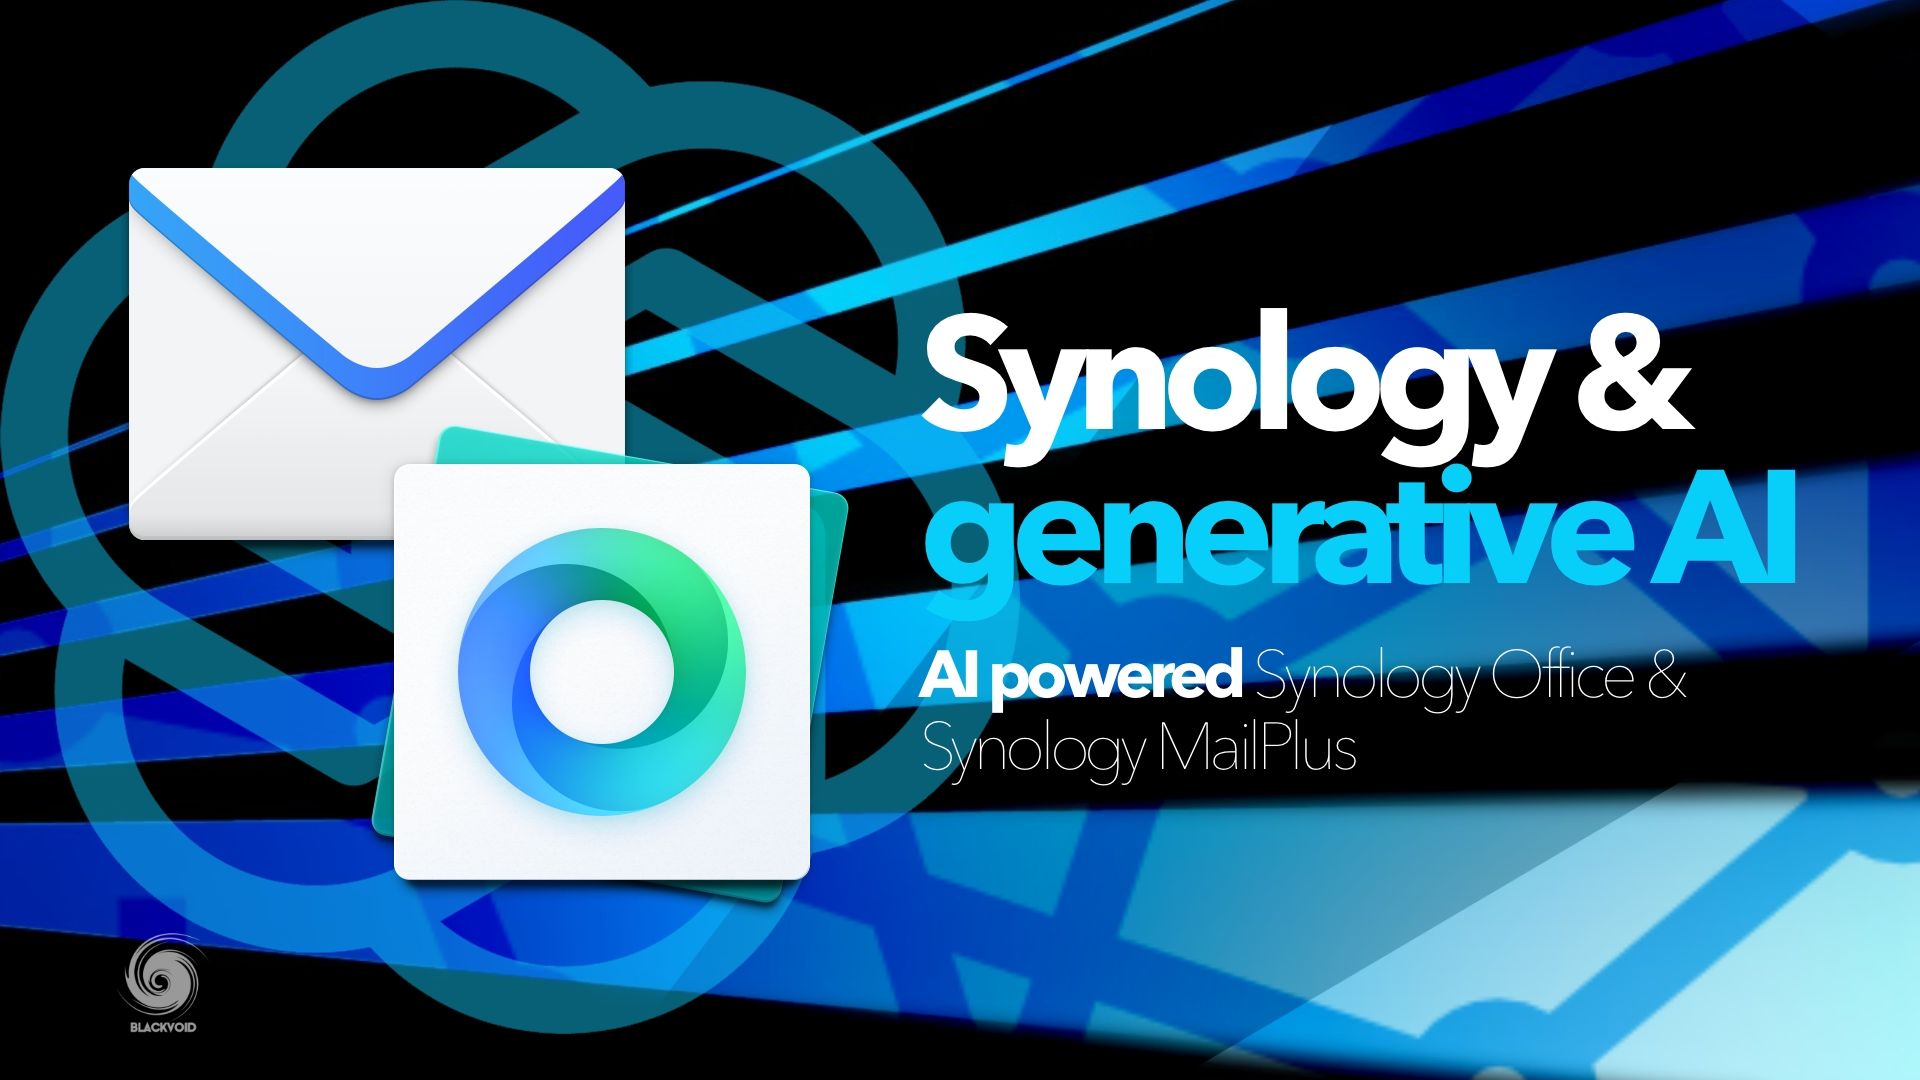 Should I get a Synology NAS in 2024?